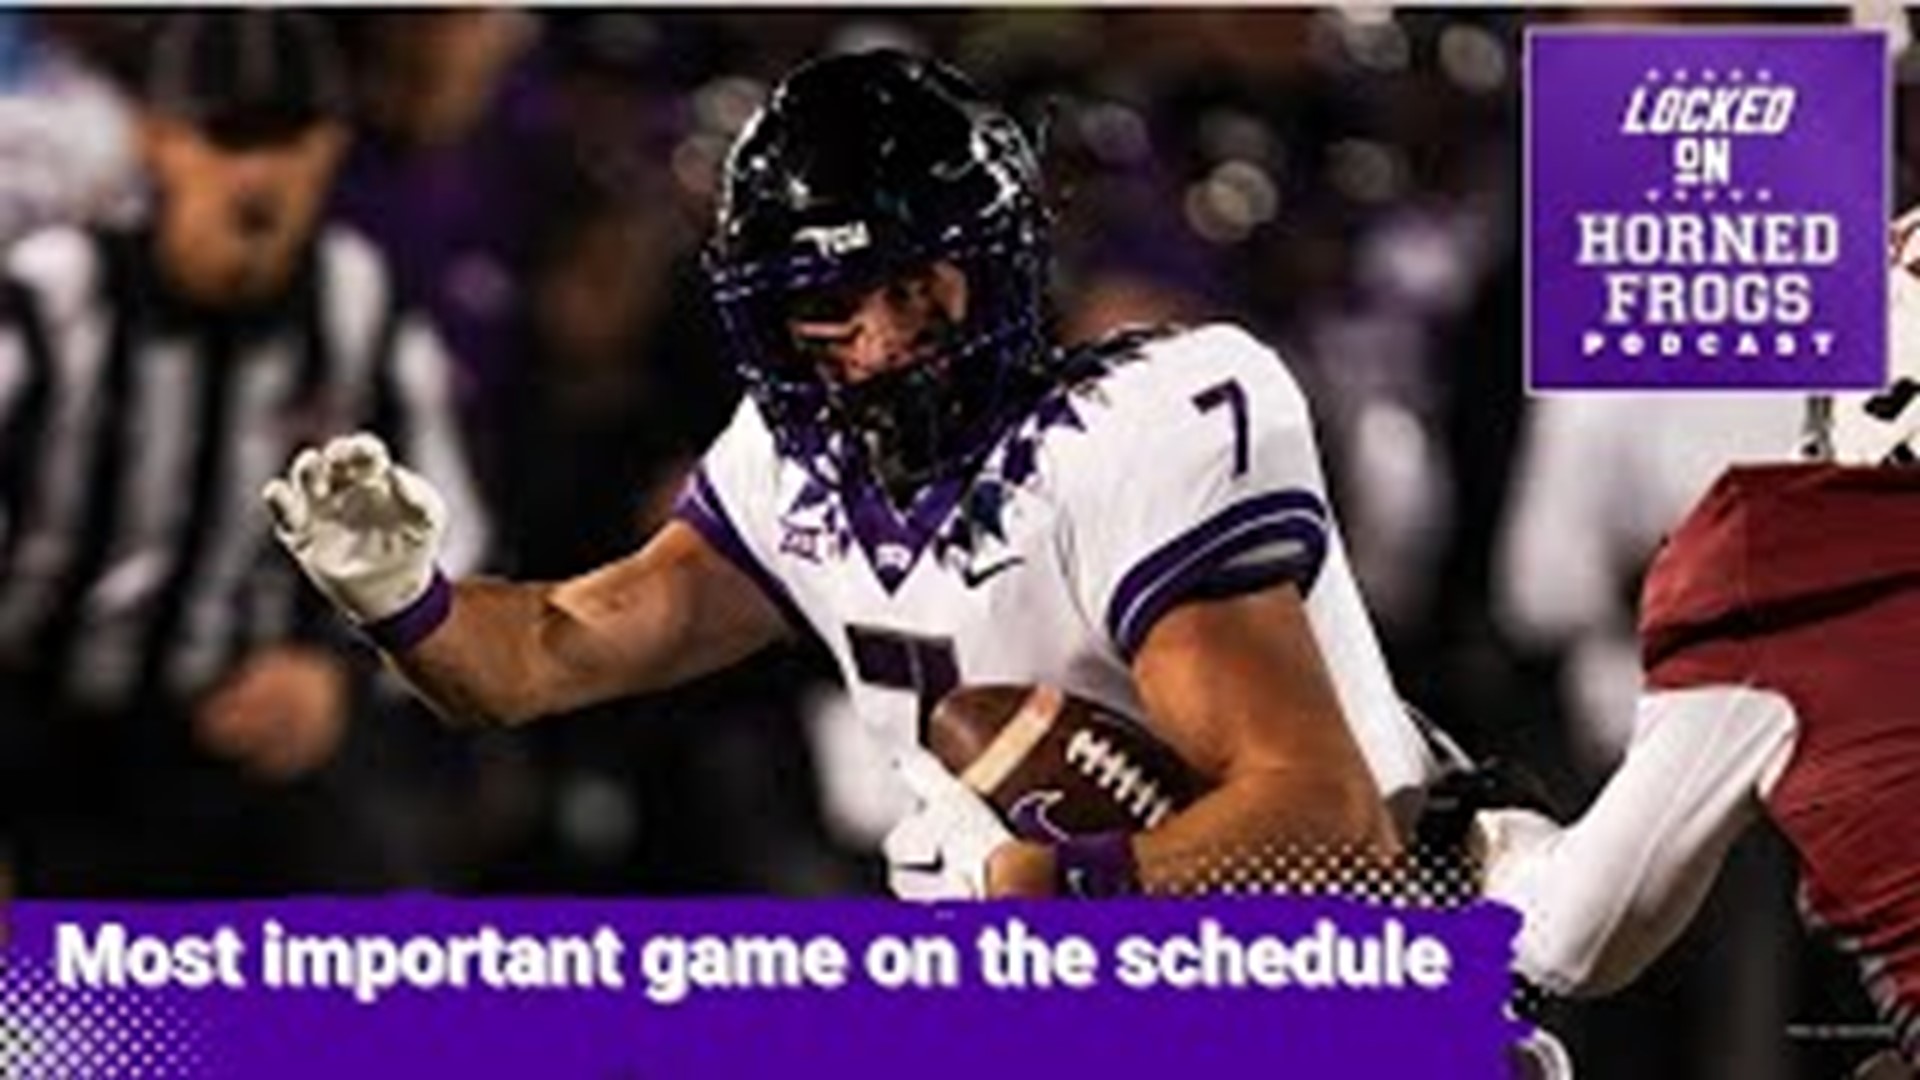 What will be the most important game on the schedule for the TCU Horned Frogs this season?